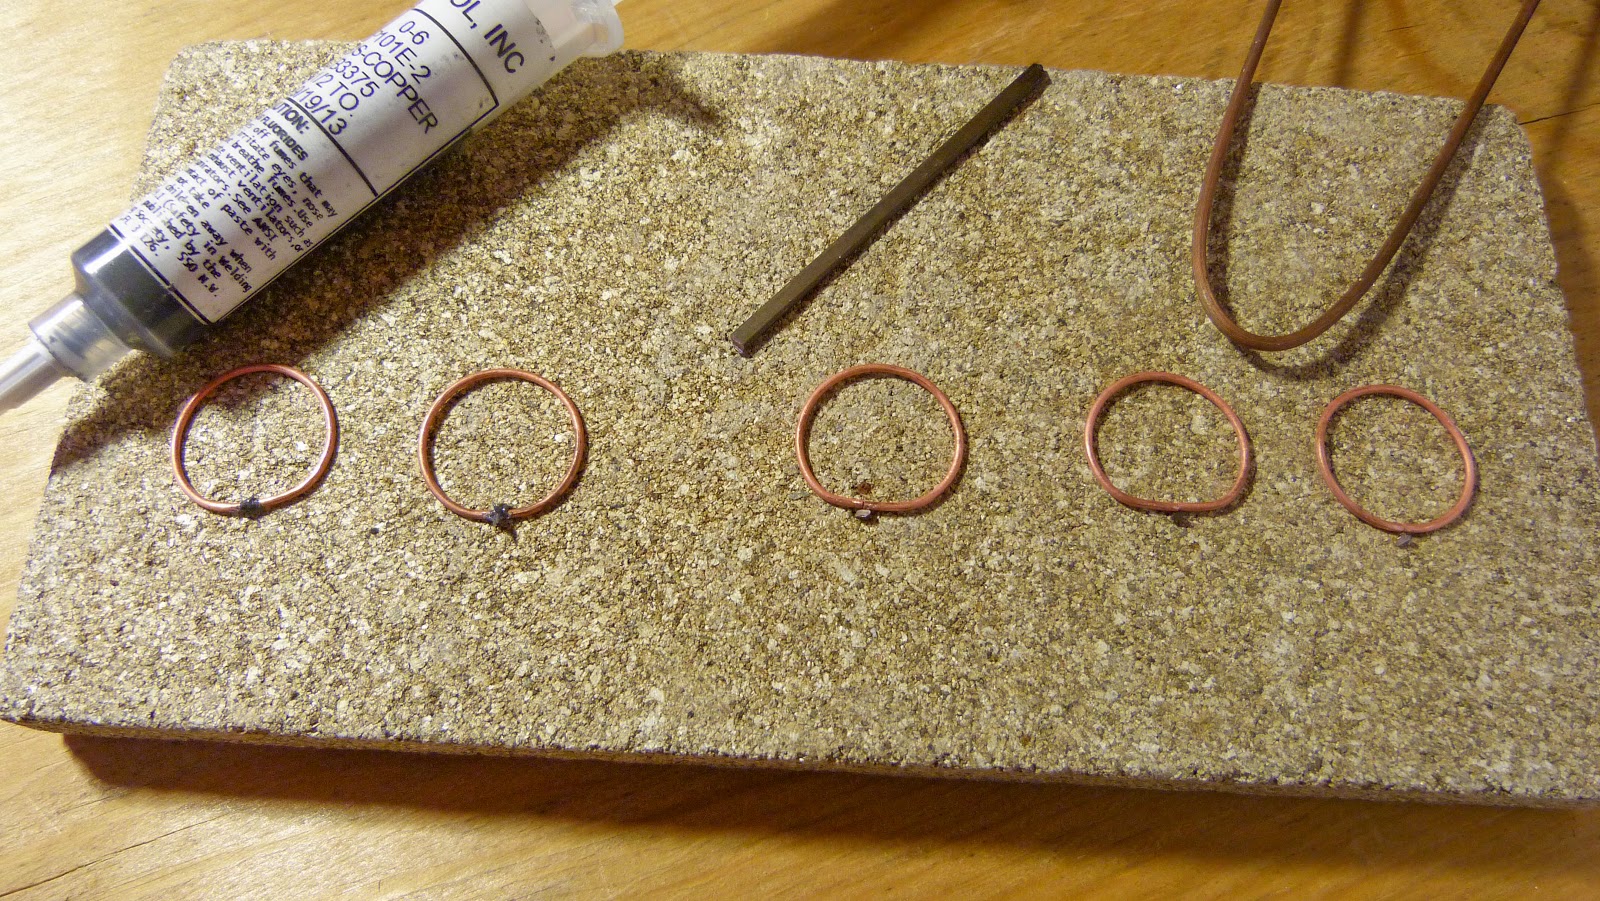 I Love Copper Solder! - Rings and Things  Soldering jewelry, Copper solder,  Jewelry making